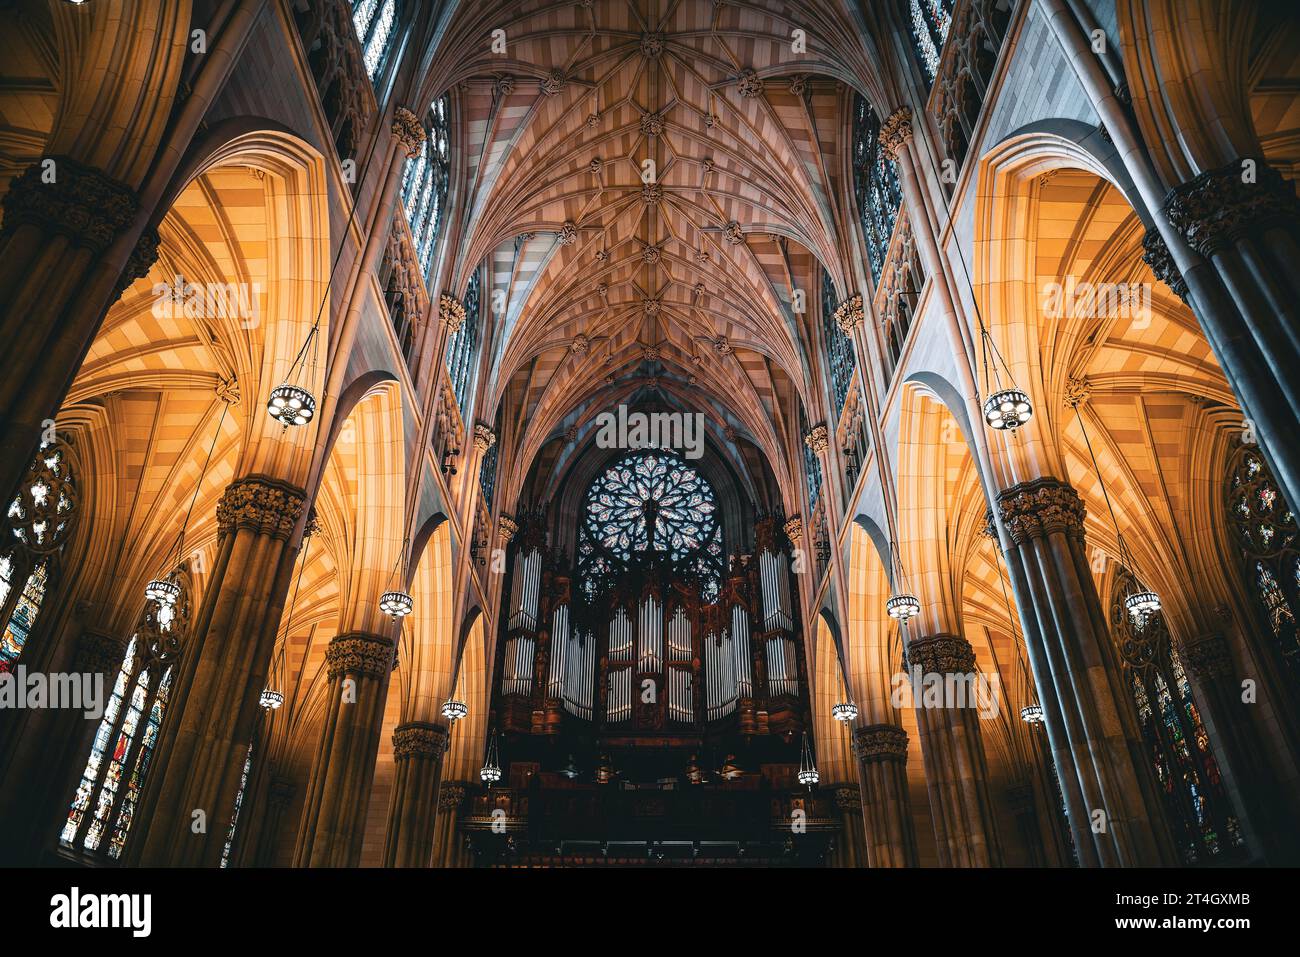 The Majestic Interior of St. Patrick's Cathedral - Manhattan, New York City Stock Photo